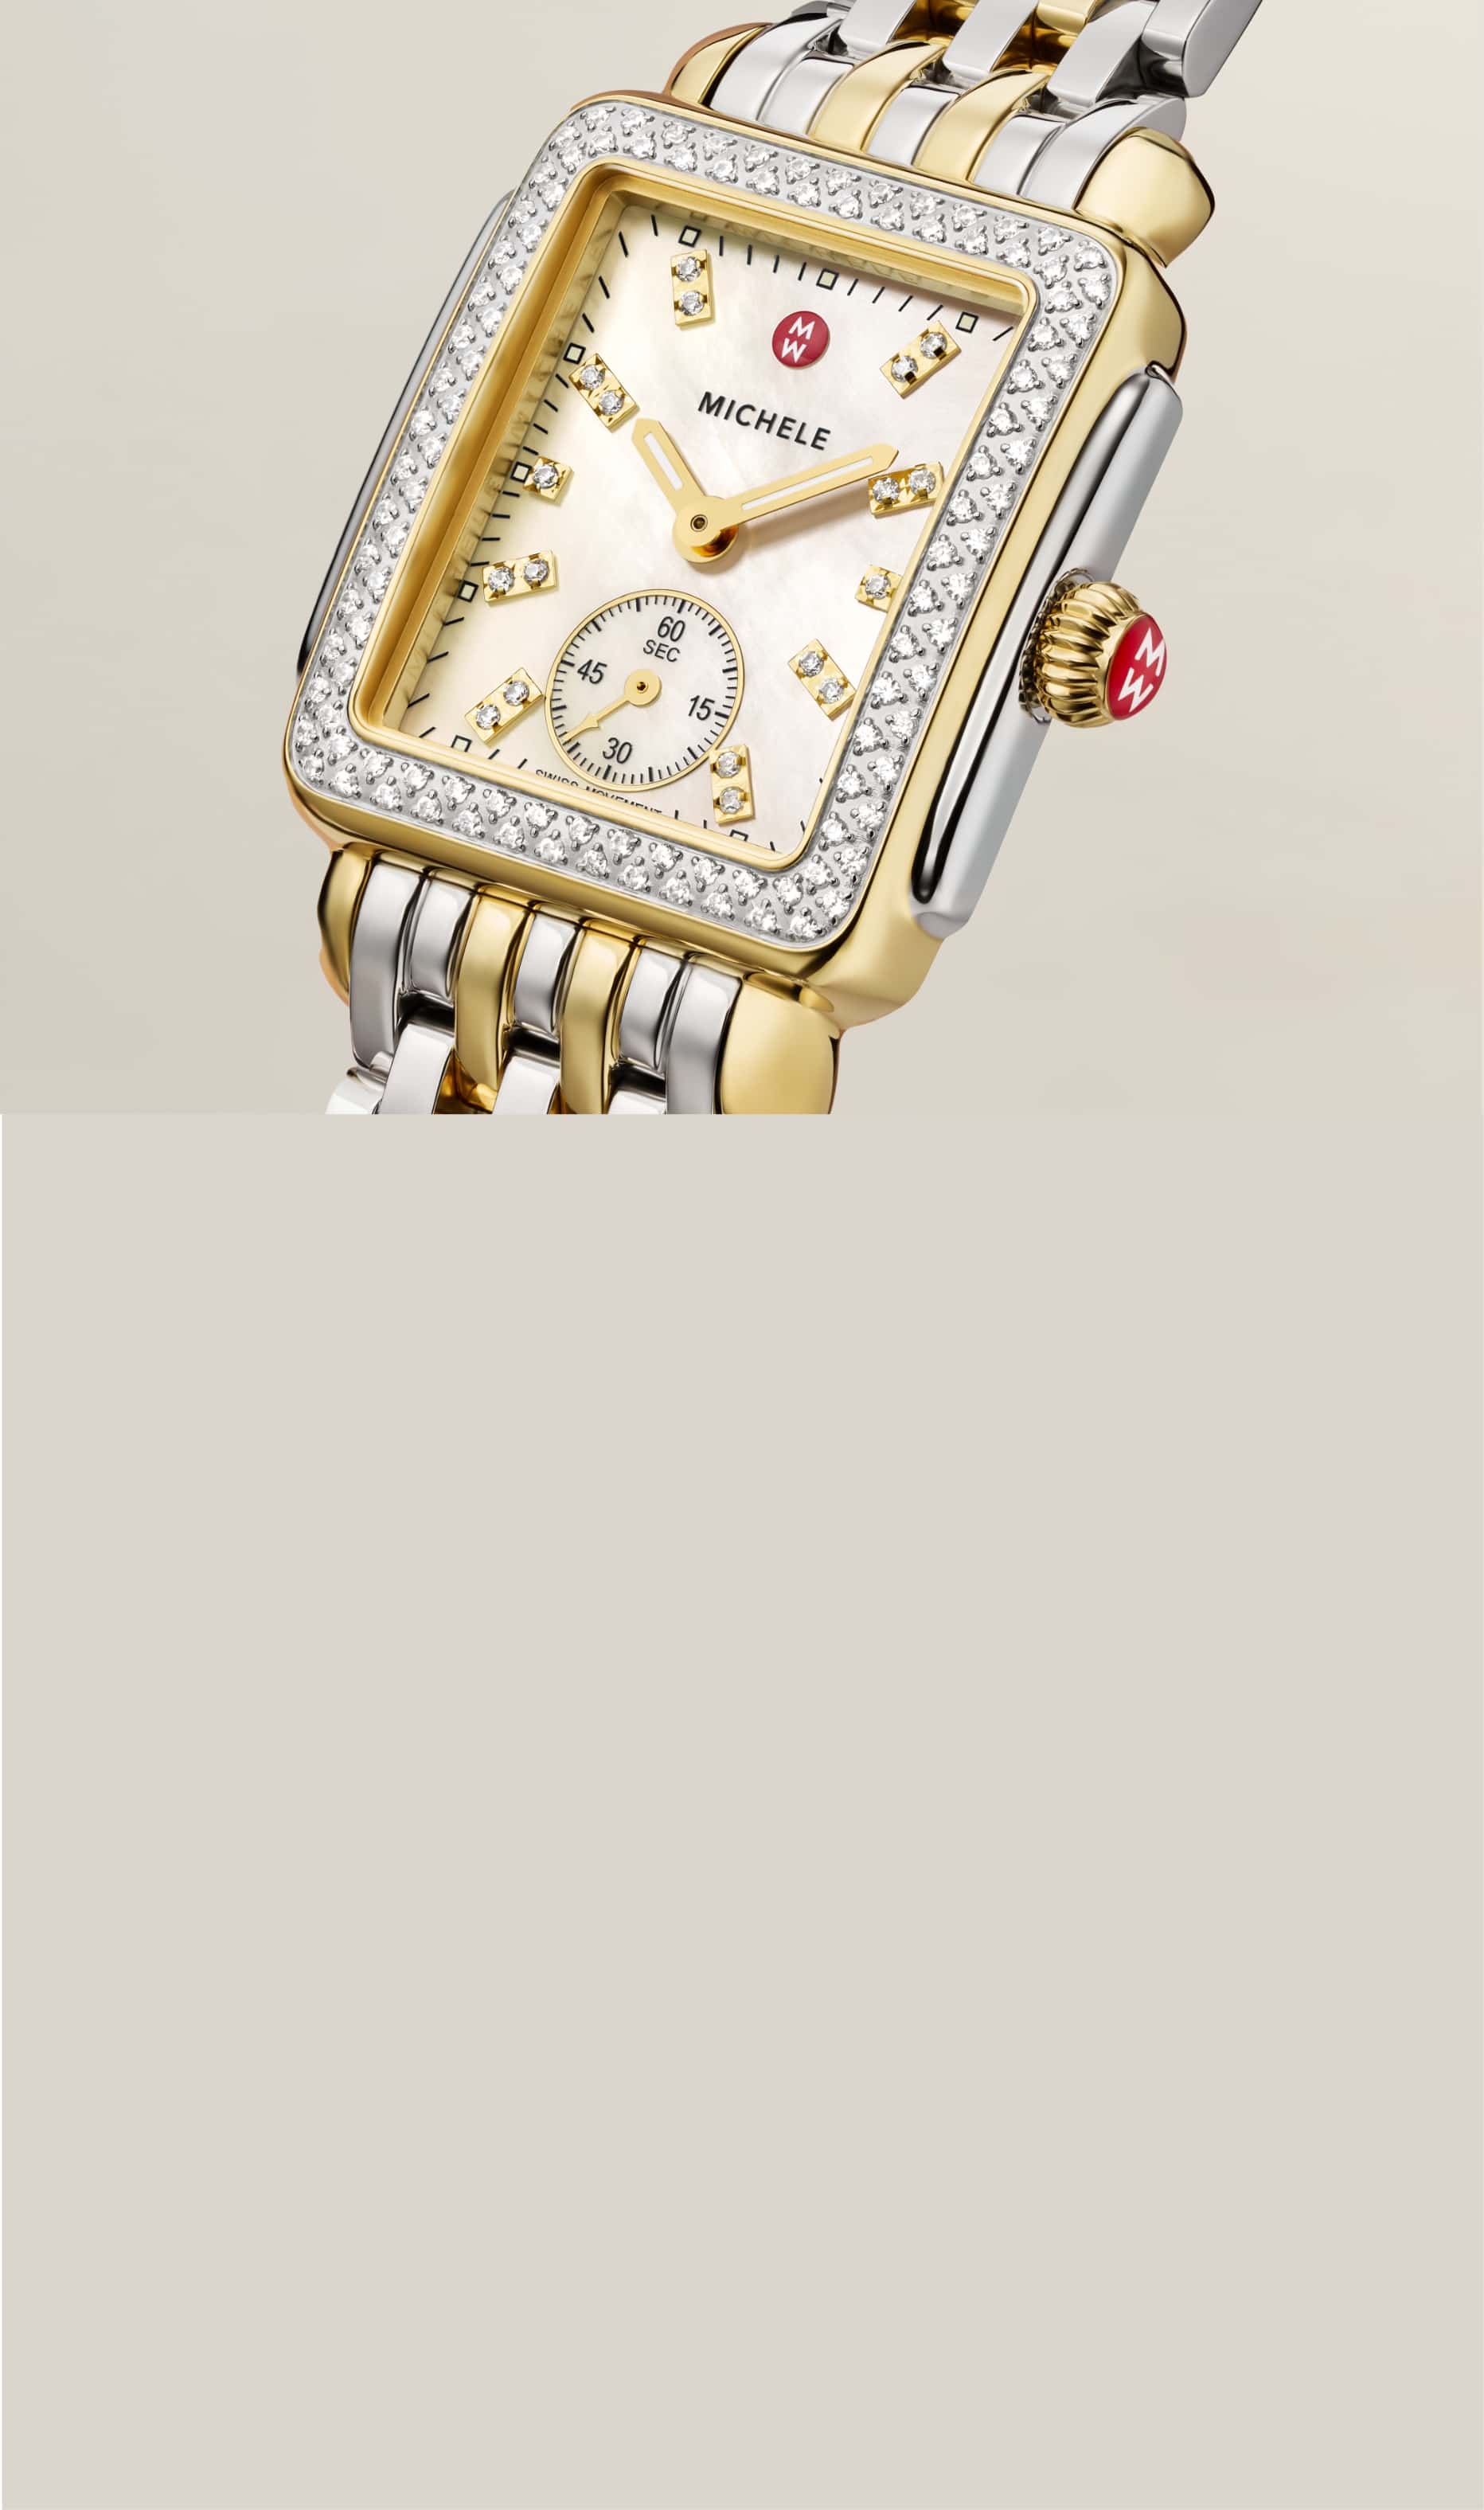 A two-tone MICHELE Deco Mid watch